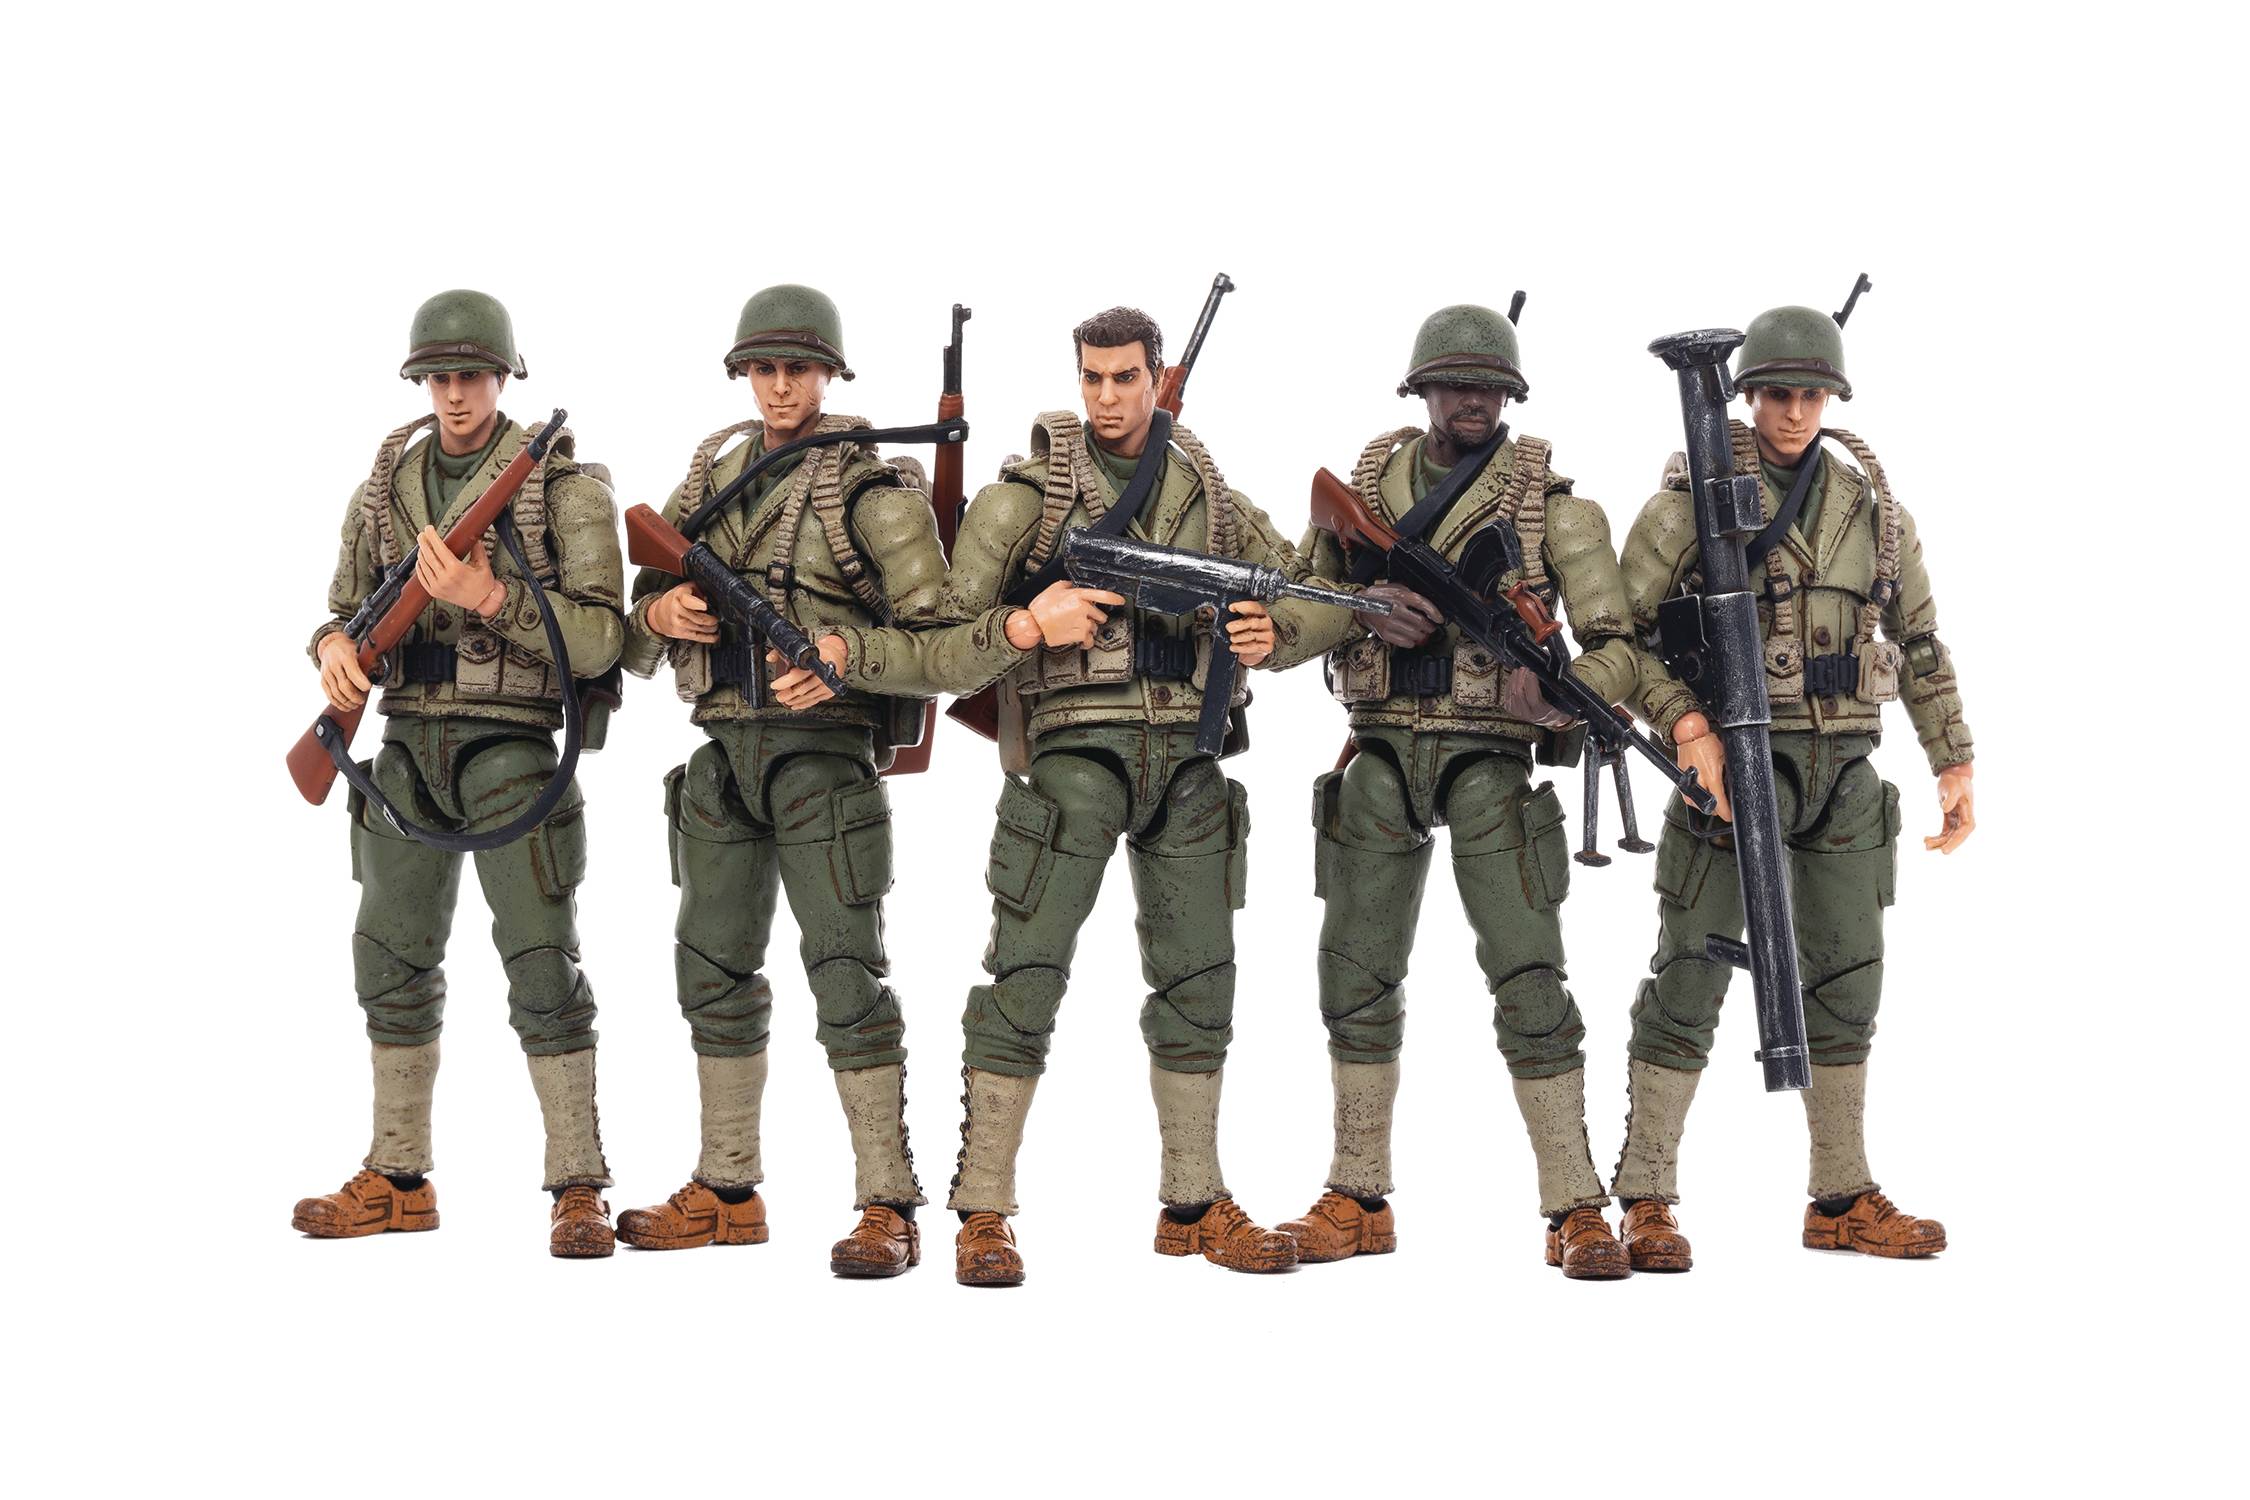 Joy Toy Ww2 United States Army 1 18 Scale Action Figure Set Small Scale Military Headquarters